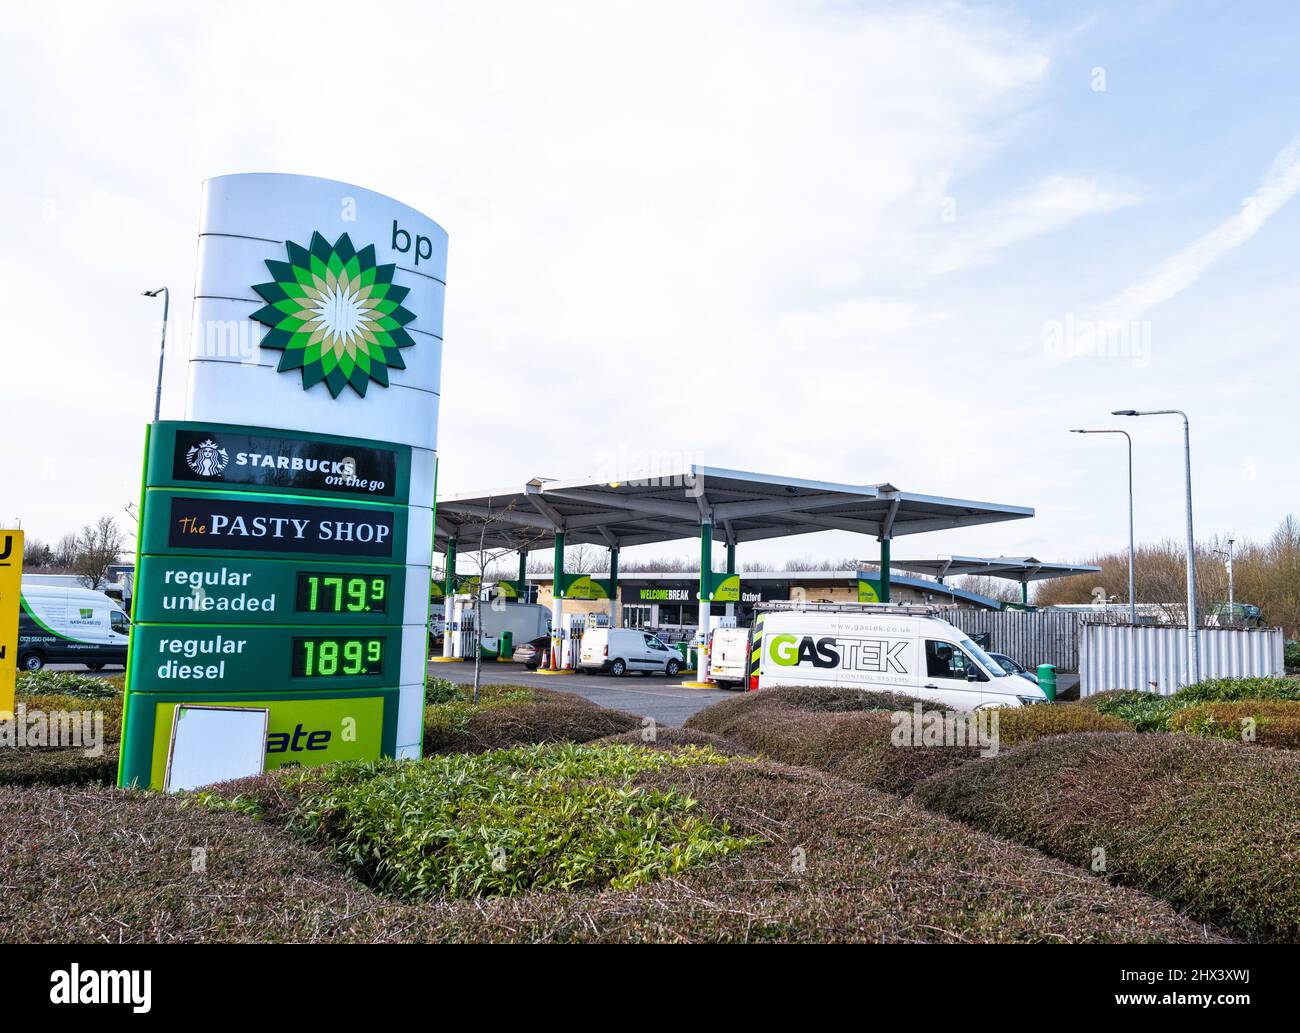 Oxford Services on the M40, UK. 9th March 2022. Drivers are met with pump prices of 179.9 for regular unleaded and 189.9 for regular diesel at Oxford Services off the M40, UK. Credit: Simon Morley/Alamy Live News Stock Photo